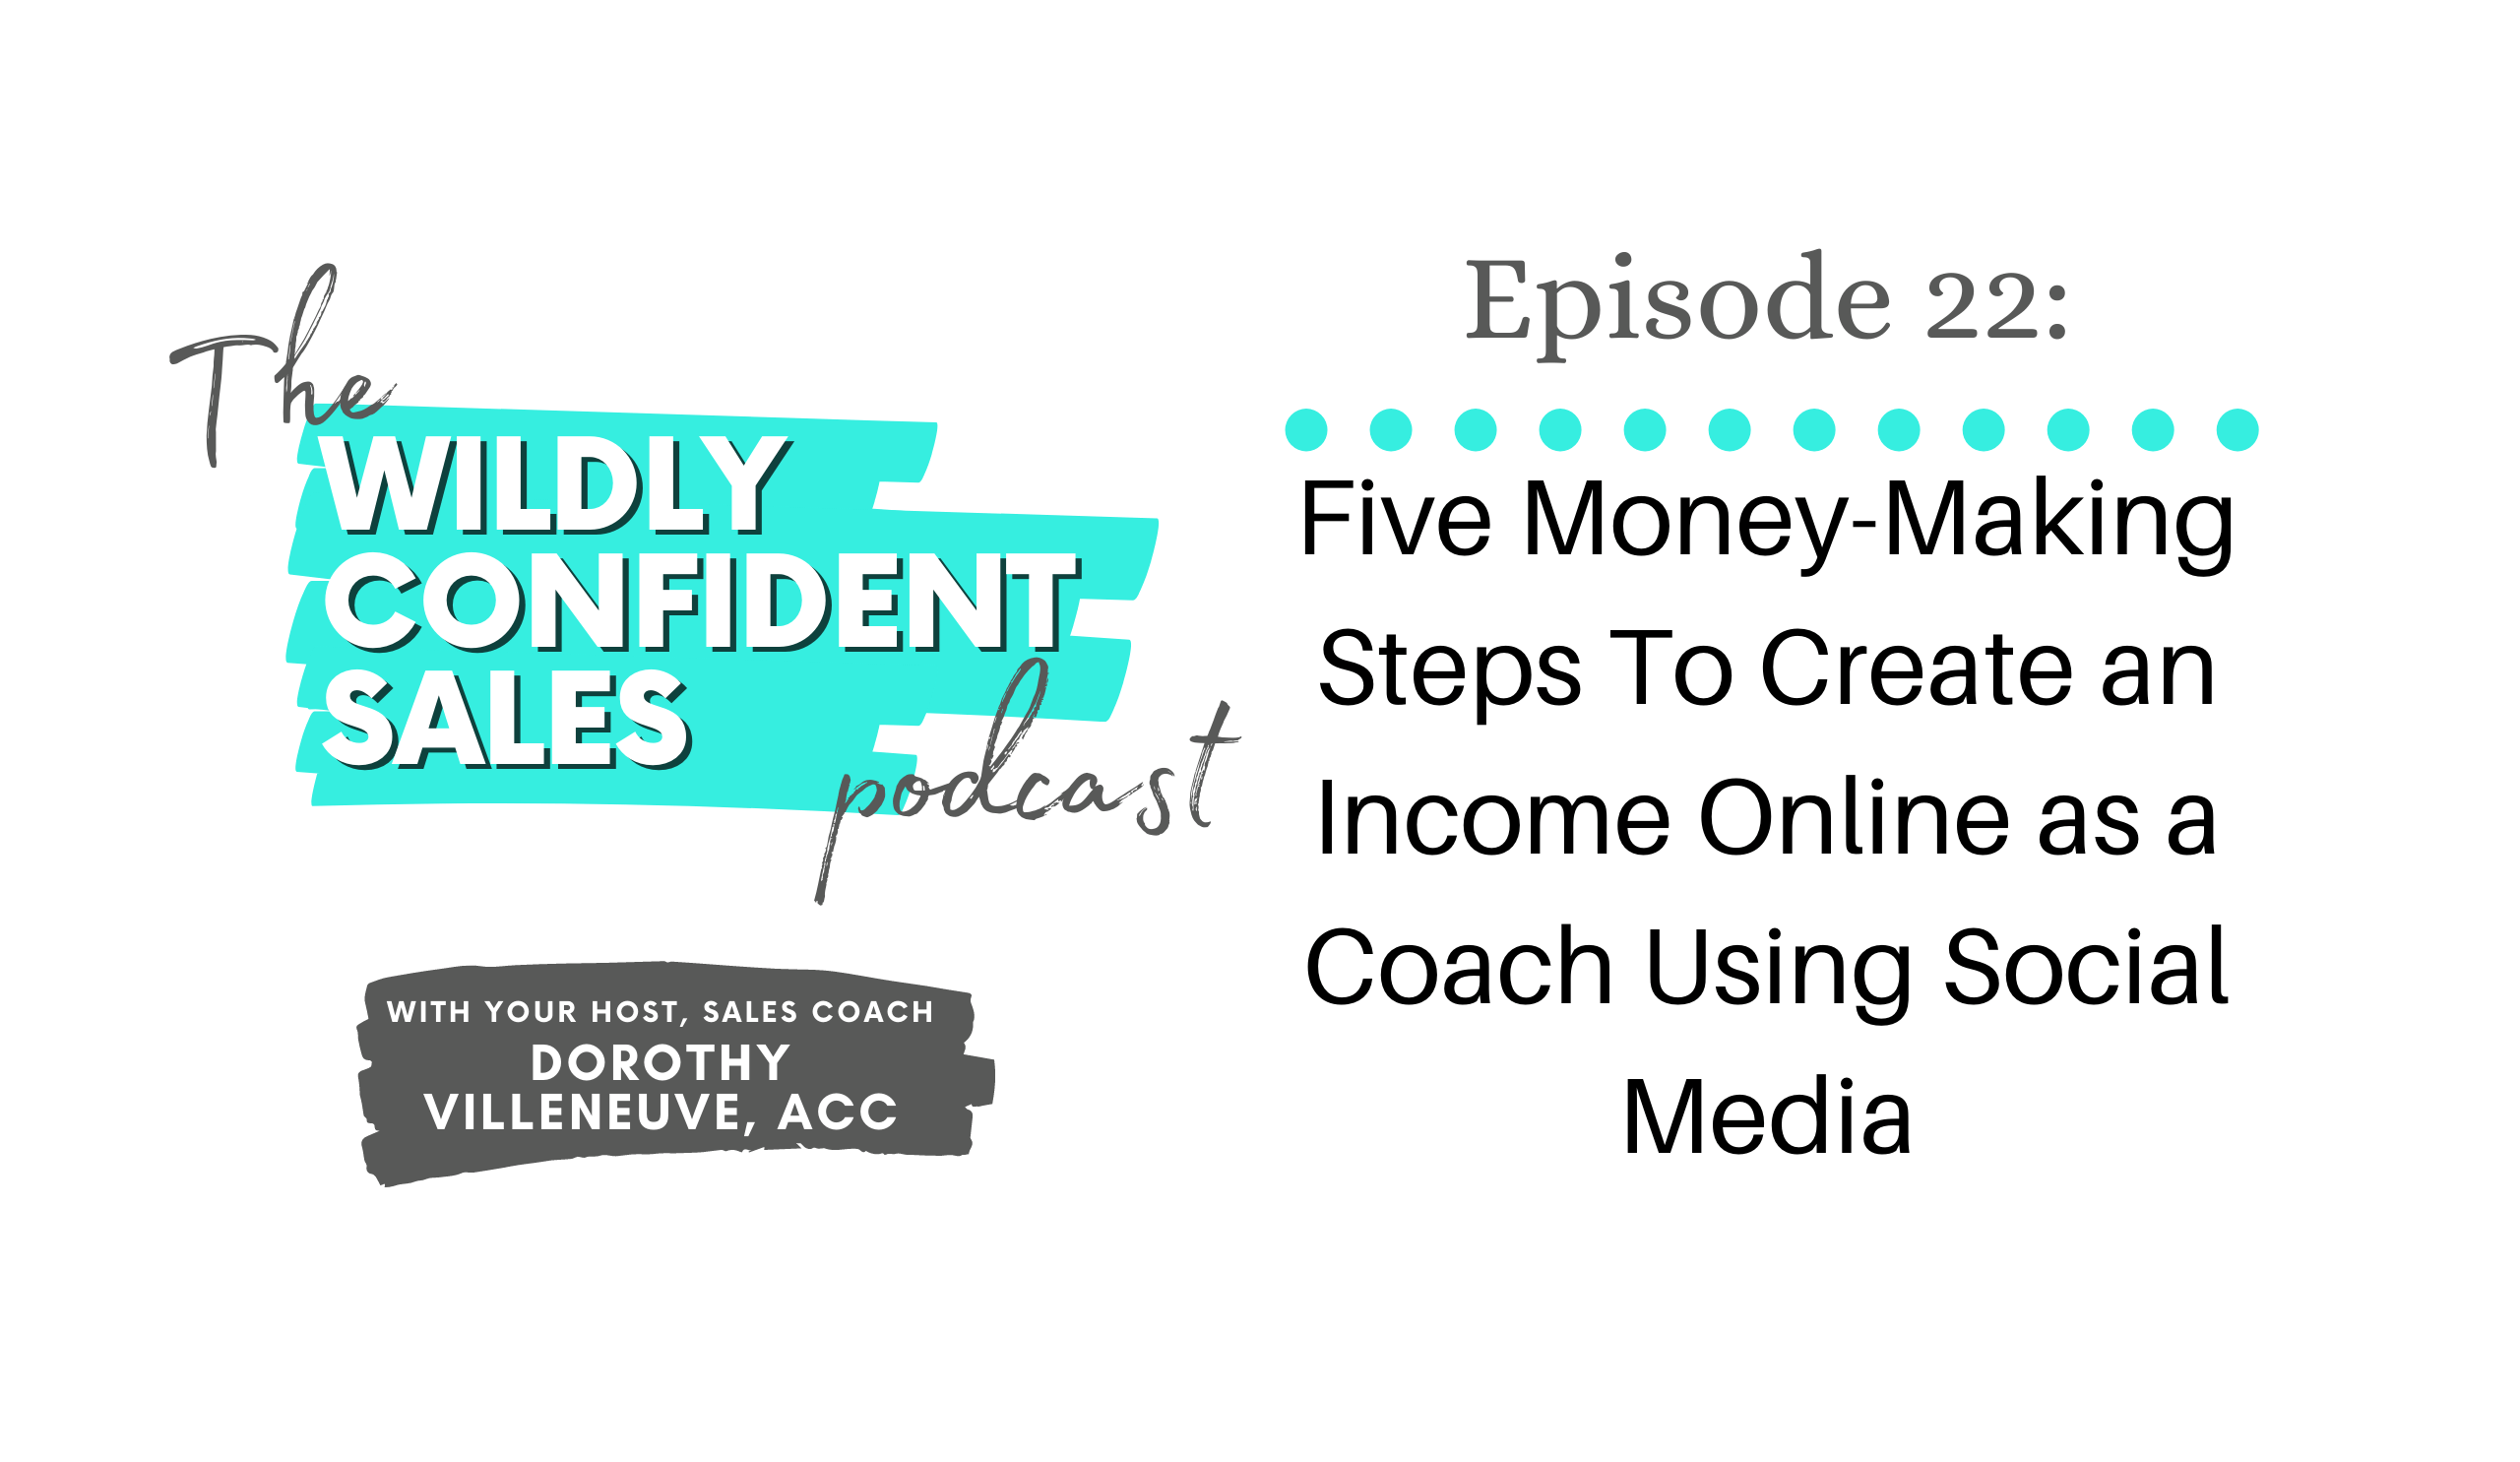 Five Money-Making Steps To Create an Income Online as a Coach Using Social Media